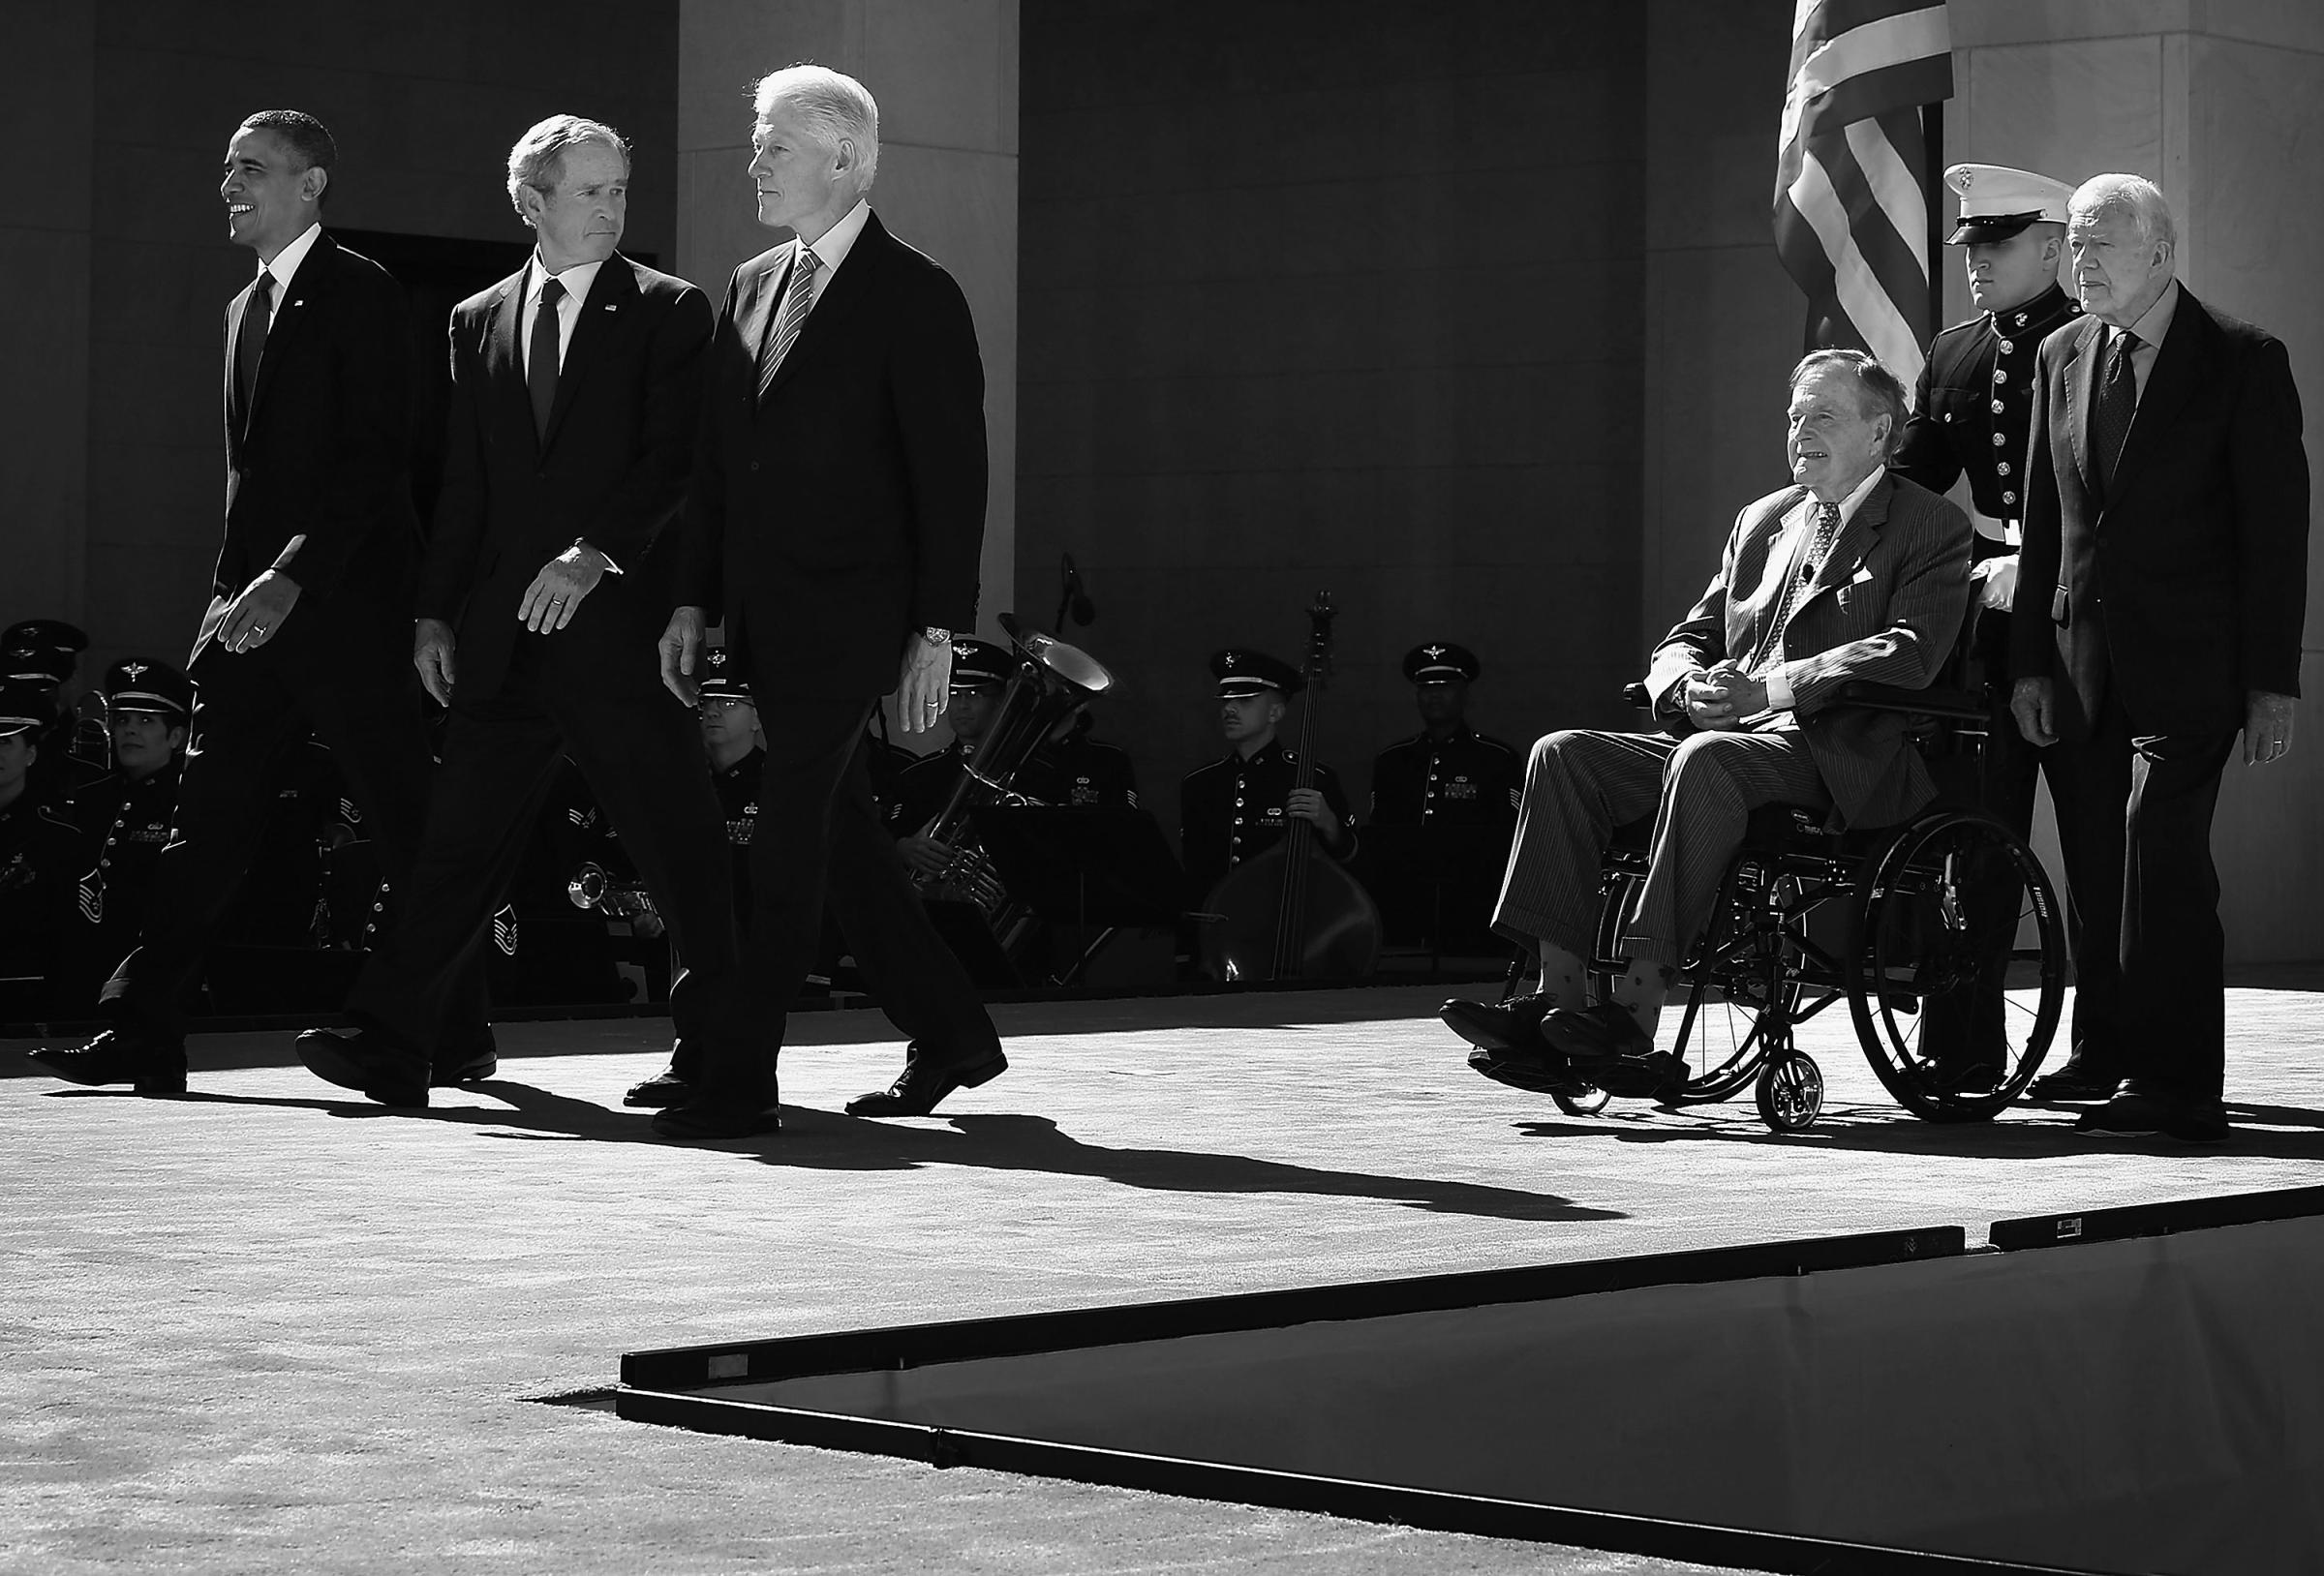 Former U.S. President George W. Bush turns around and checks on his father and former President George H.W. Bush as all five living presidents, including Barack Obama, Bill Clinton and Jimmy Carter, come out on stage during the opening ceremony of the George W. Bush Presidential Center on April 25, 2013 in Dallas, Texas.